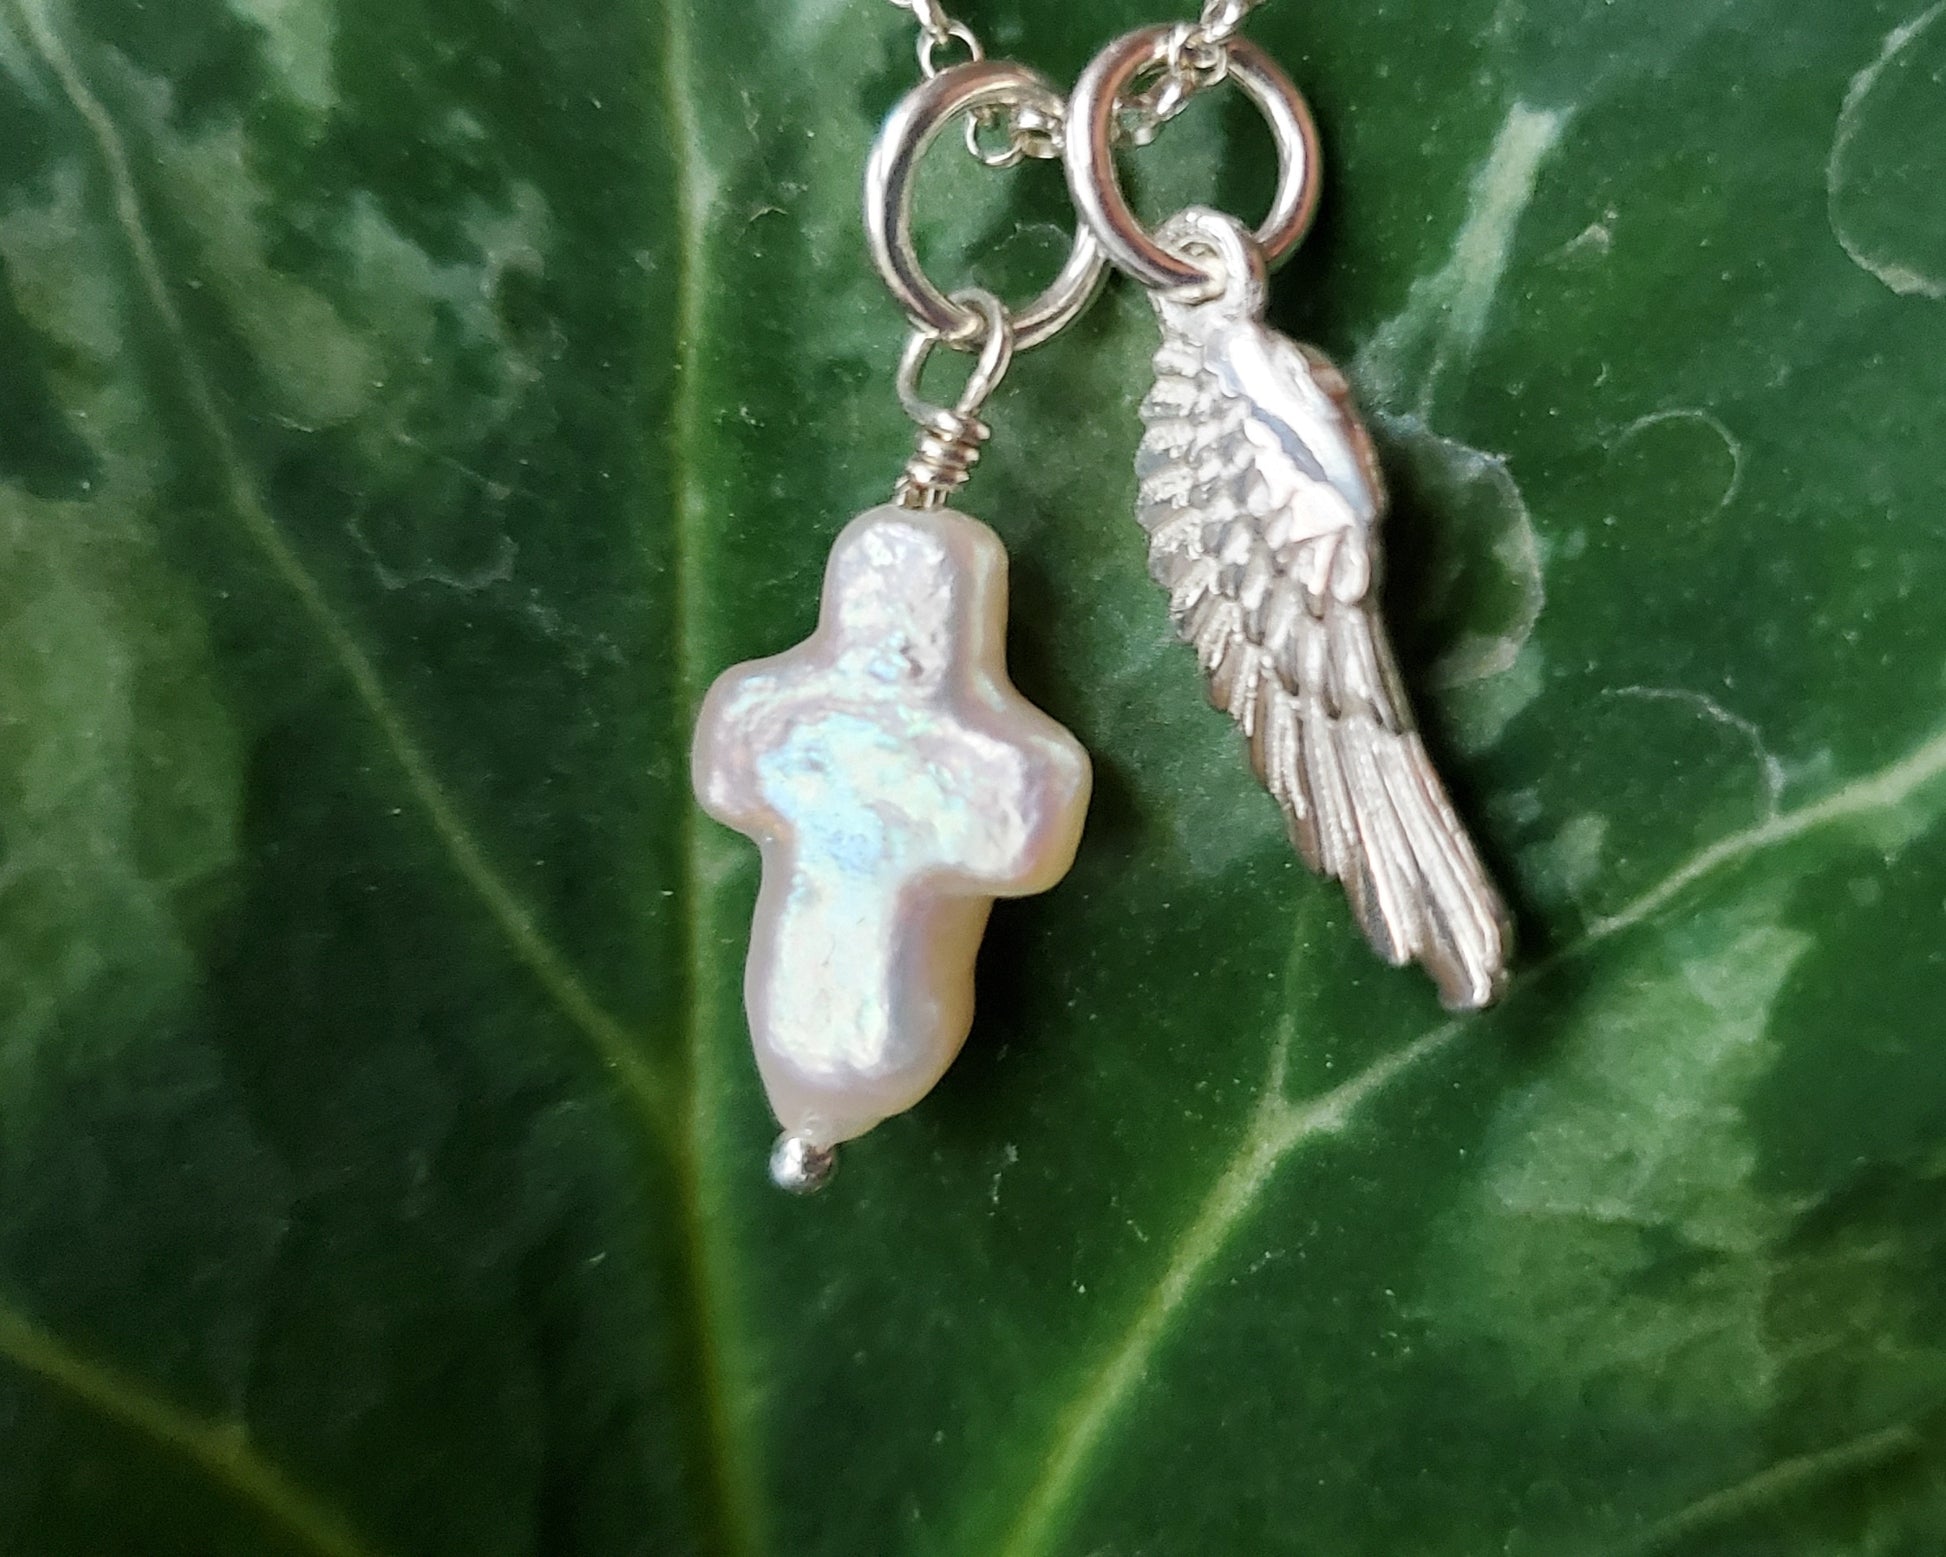 Pearl Cross Wing Necklace, Psalm 91, Angel Wing